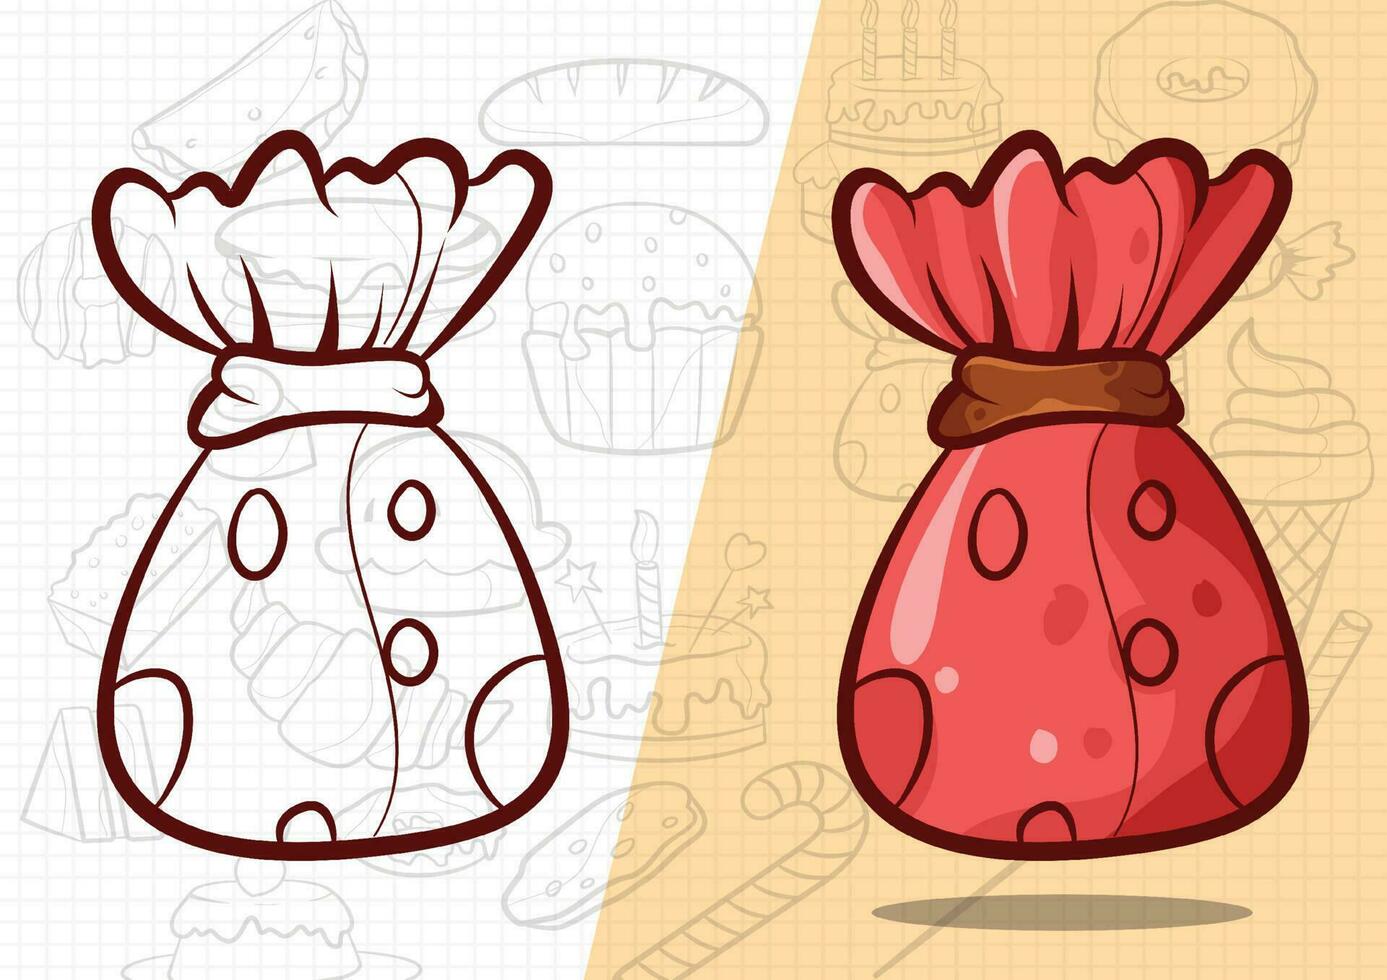 cartoon style sweet and delicious cake art illustration vector